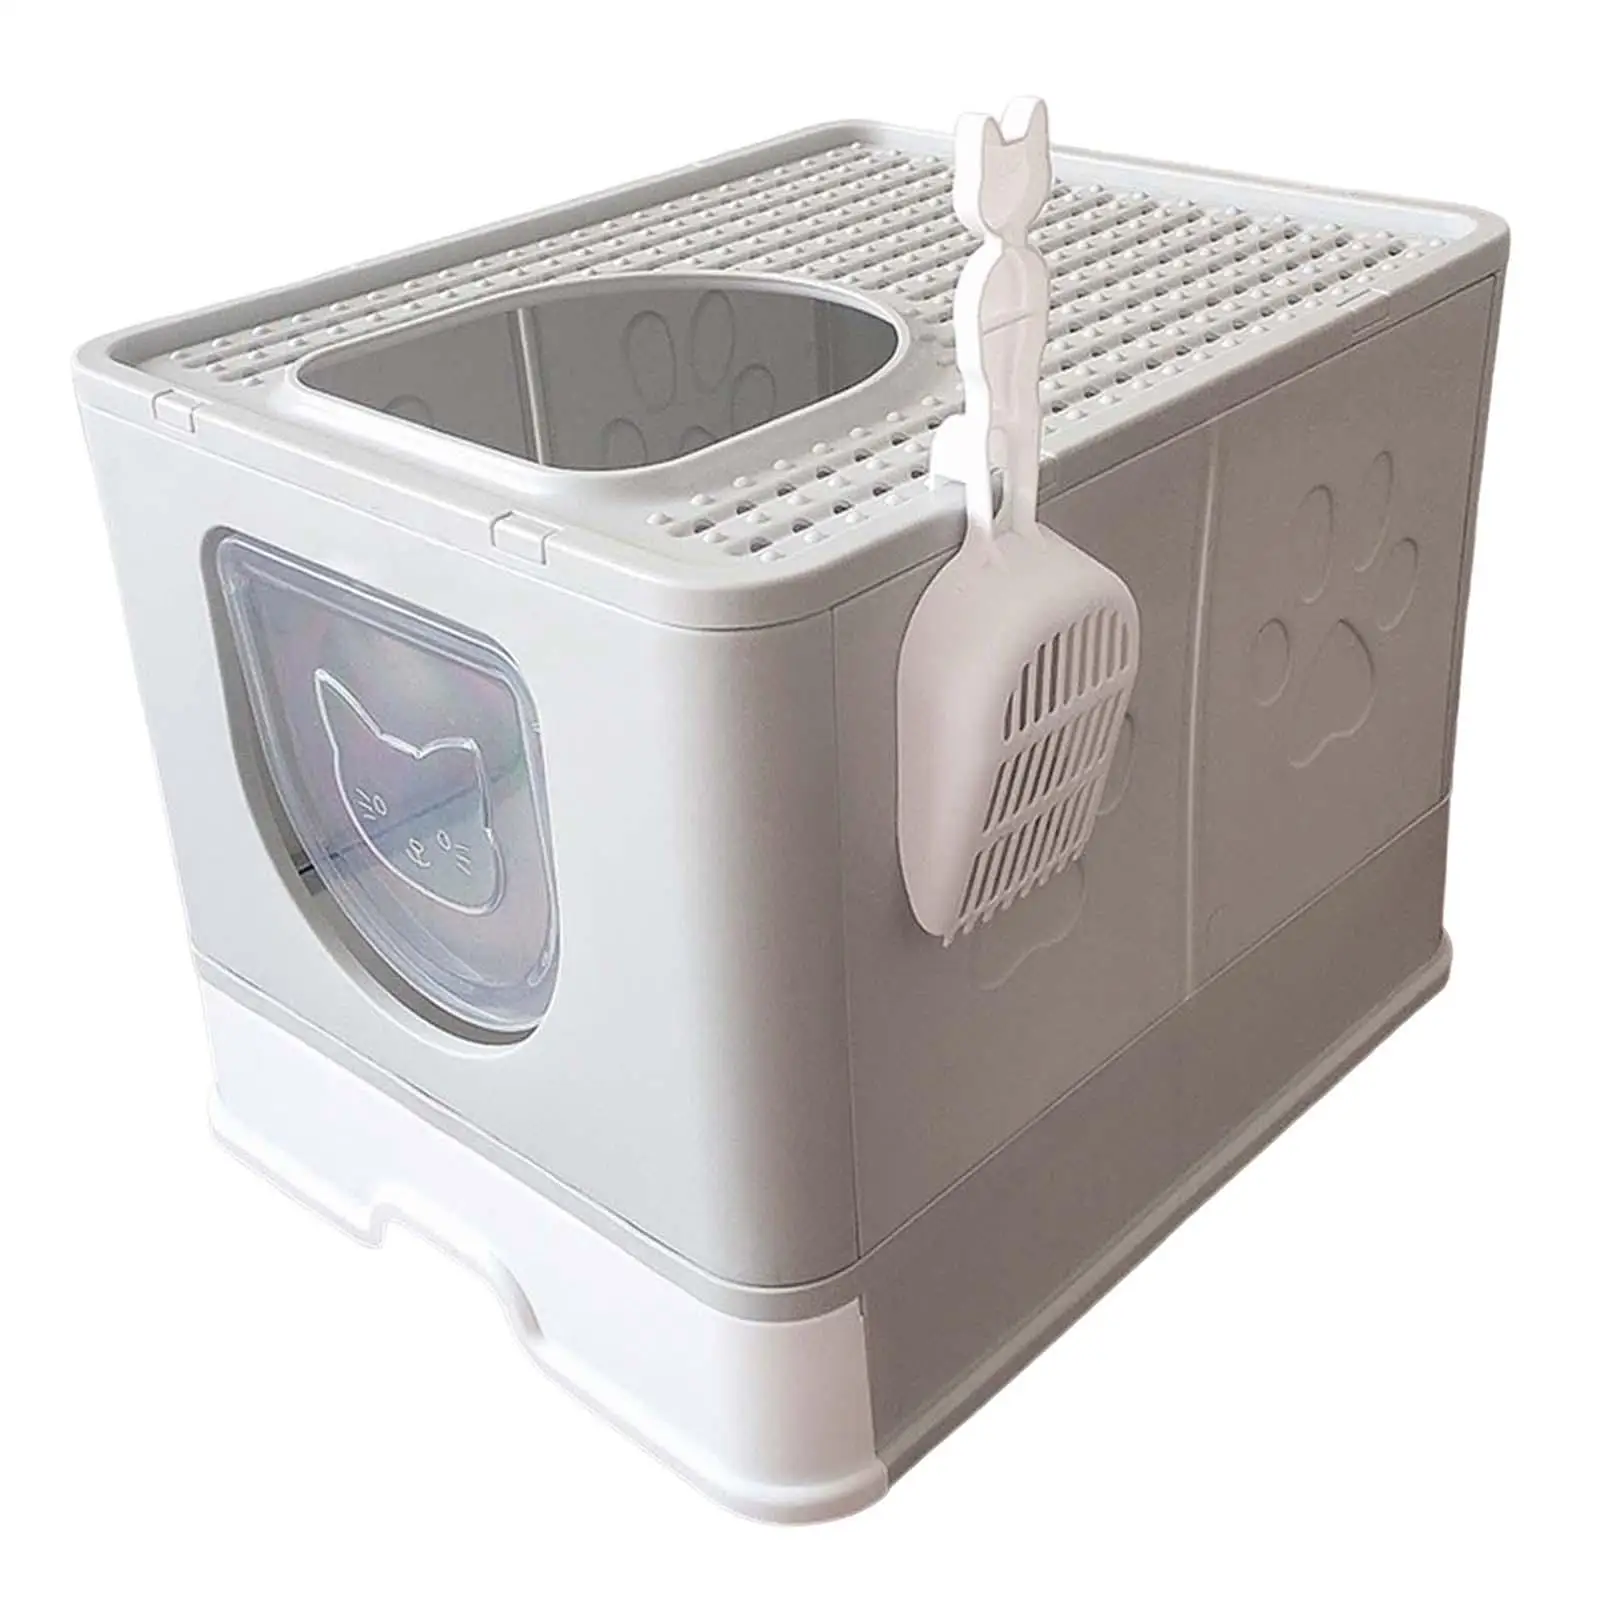 Hooded Cat Litter Box Enclosed Cat Toilet Kitty Litter Tray with Front Door Flap Durable Reusable Removable Pet Litter Box